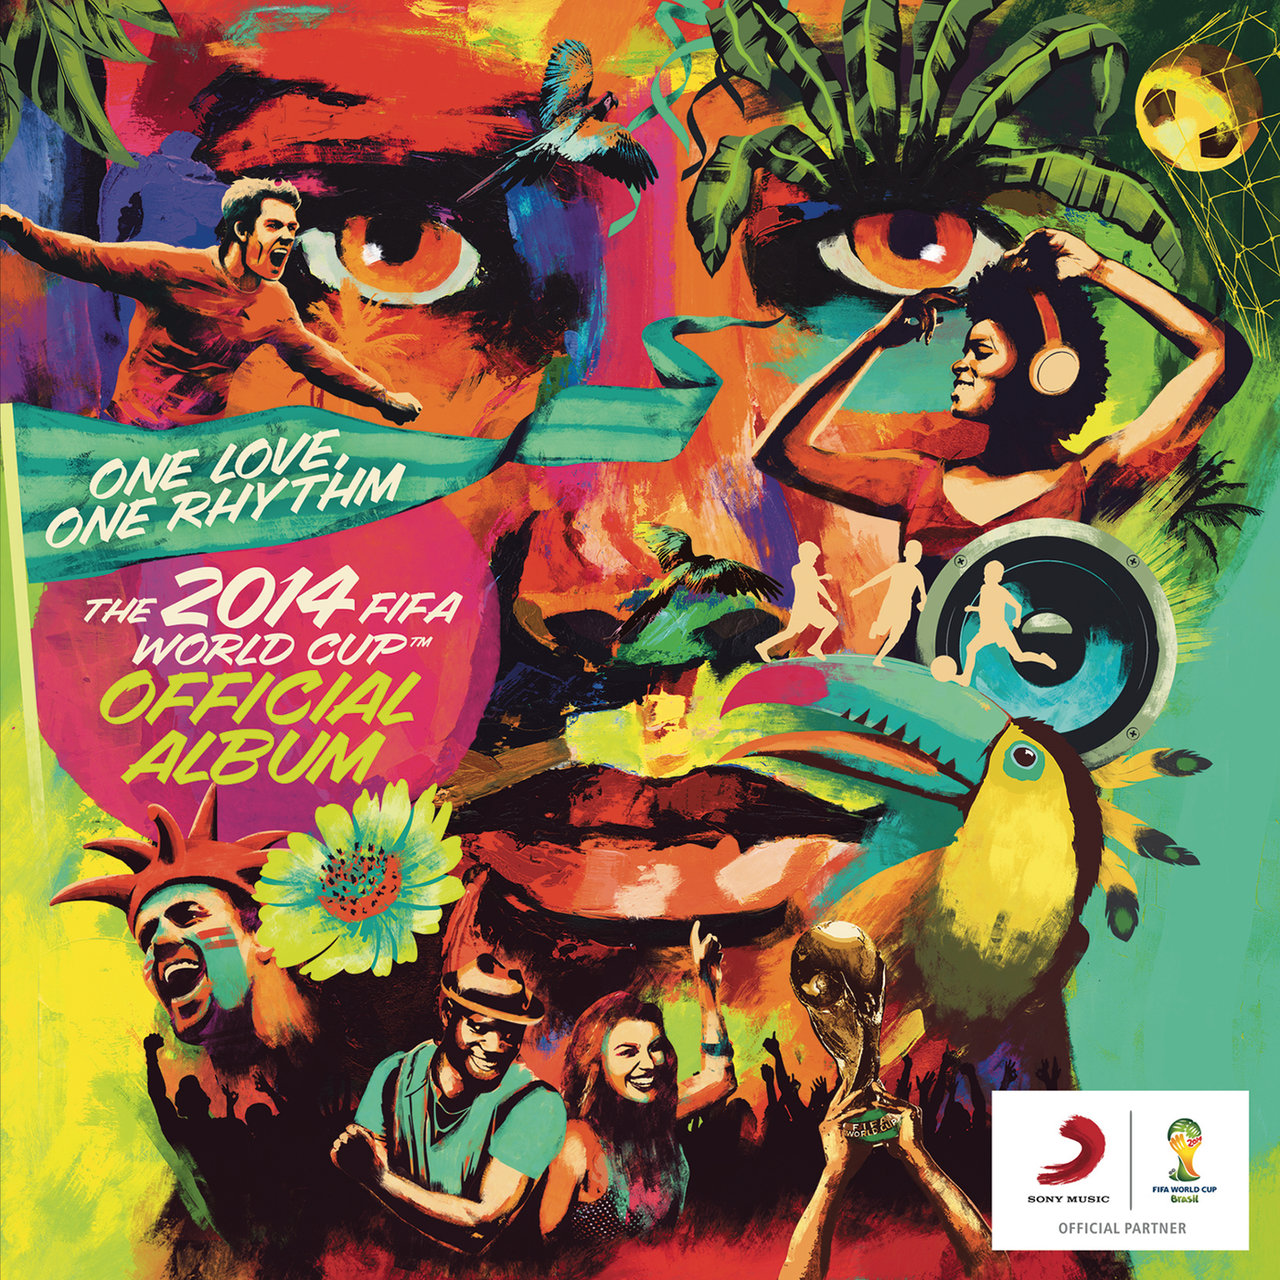 Various Artists — The 2014 FIFA World Cup Official Album: One Love, One Rhythm cover artwork